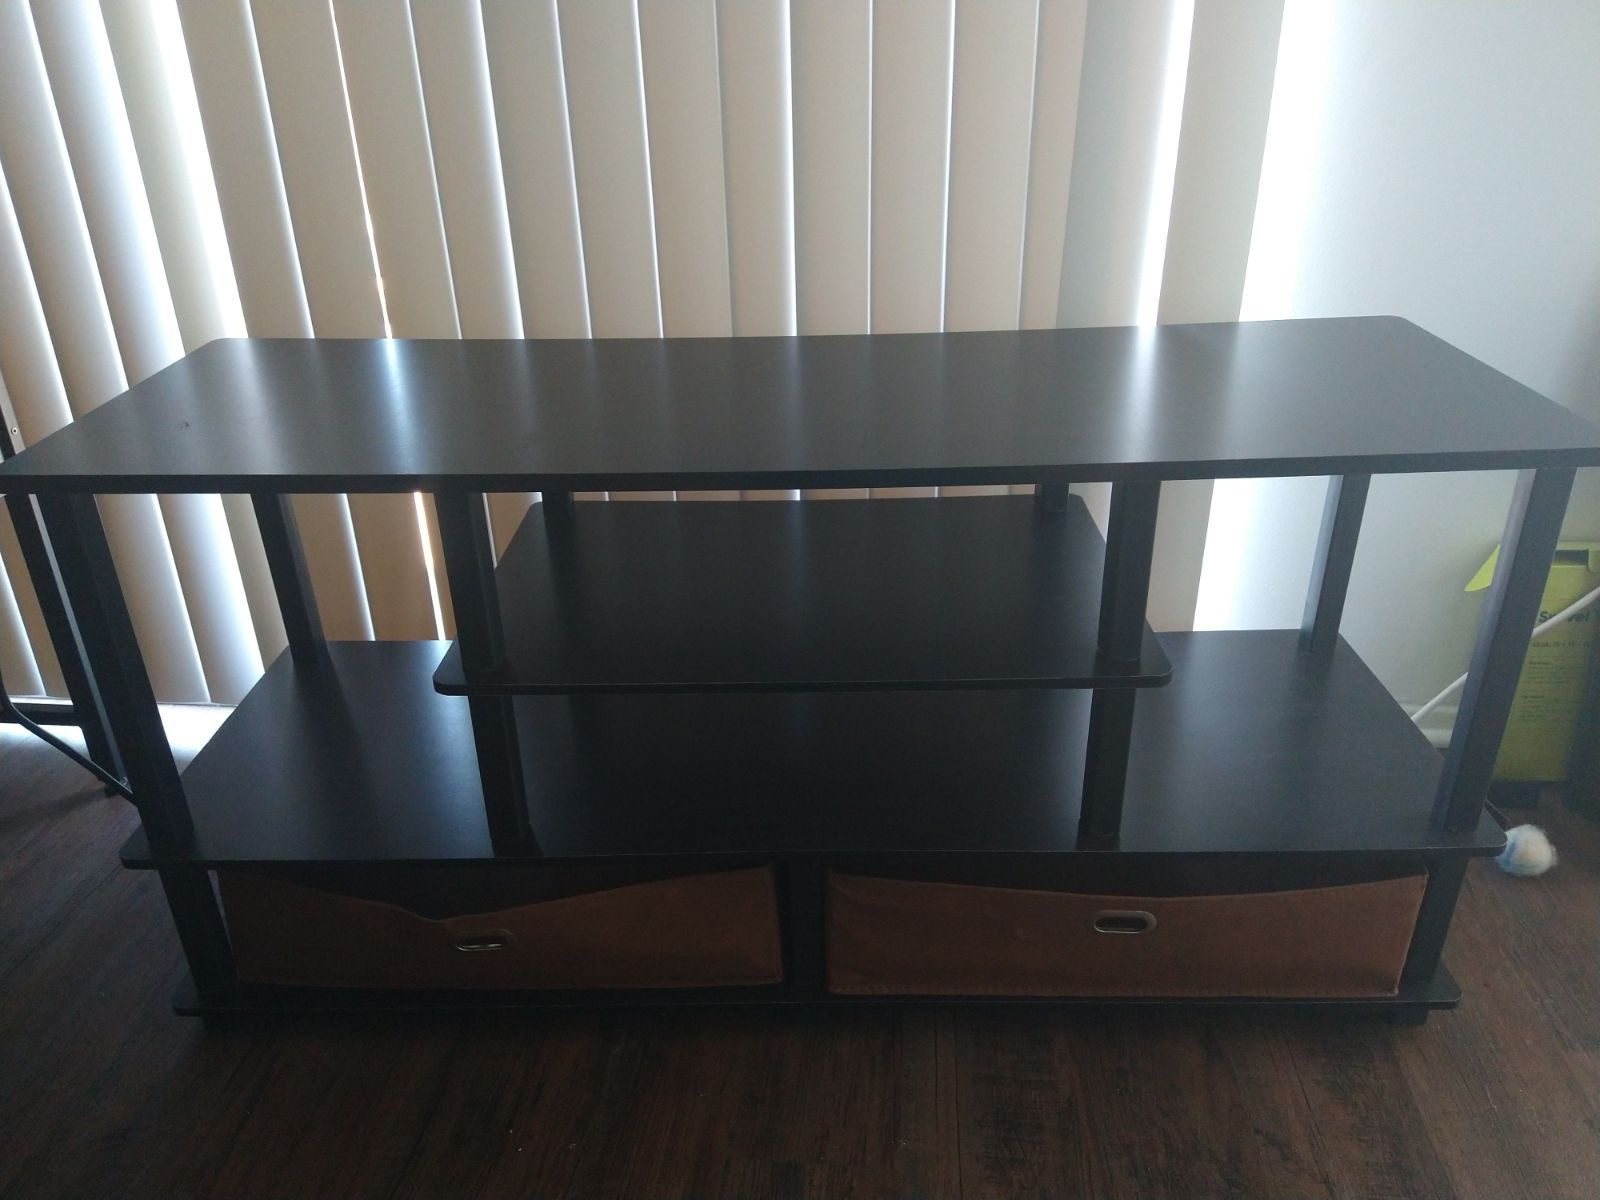 50 Inch TV Stand - Owned for 1 Year